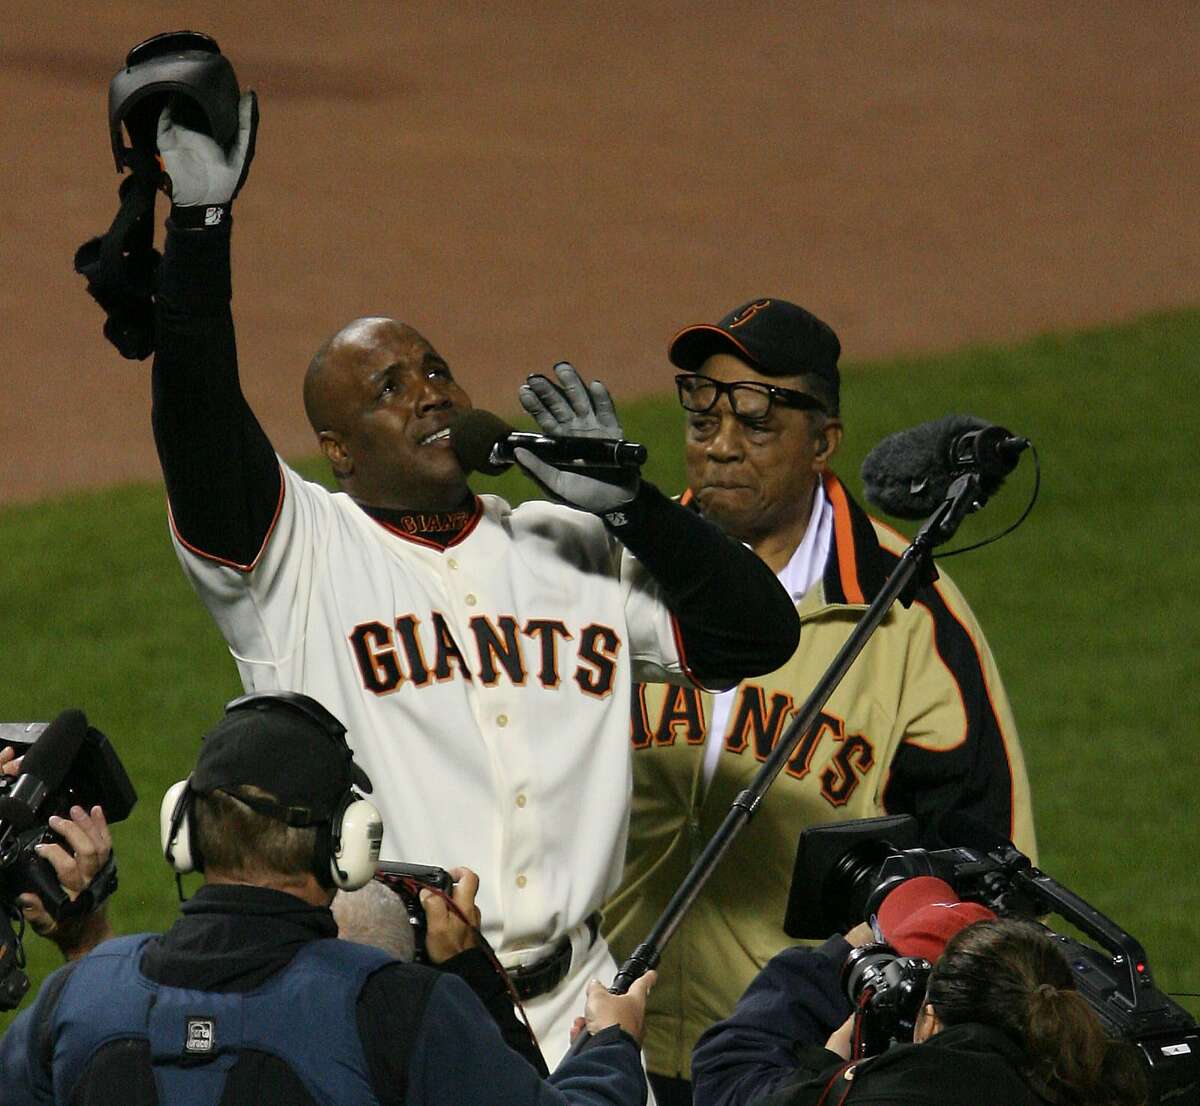 After hitting his 756th home run, Barry Bonds and Willie Mays appear to be near tears. Celebration of Barry Bonds's 756th home run that breaks the all-time career home run record.